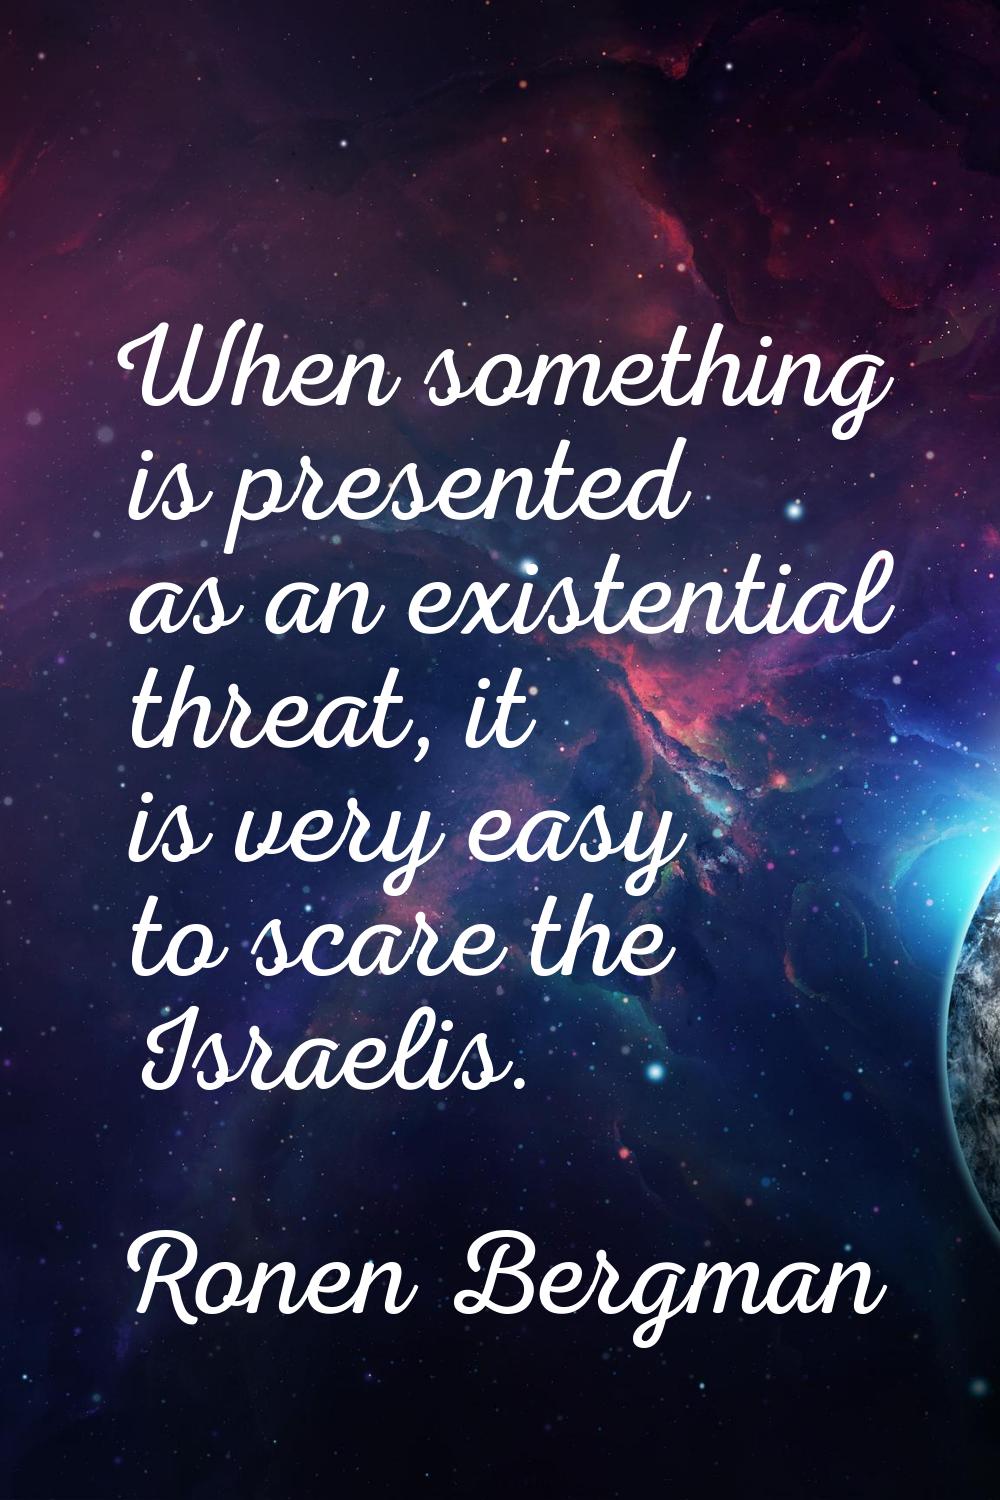 When something is presented as an existential threat, it is very easy to scare the Israelis.